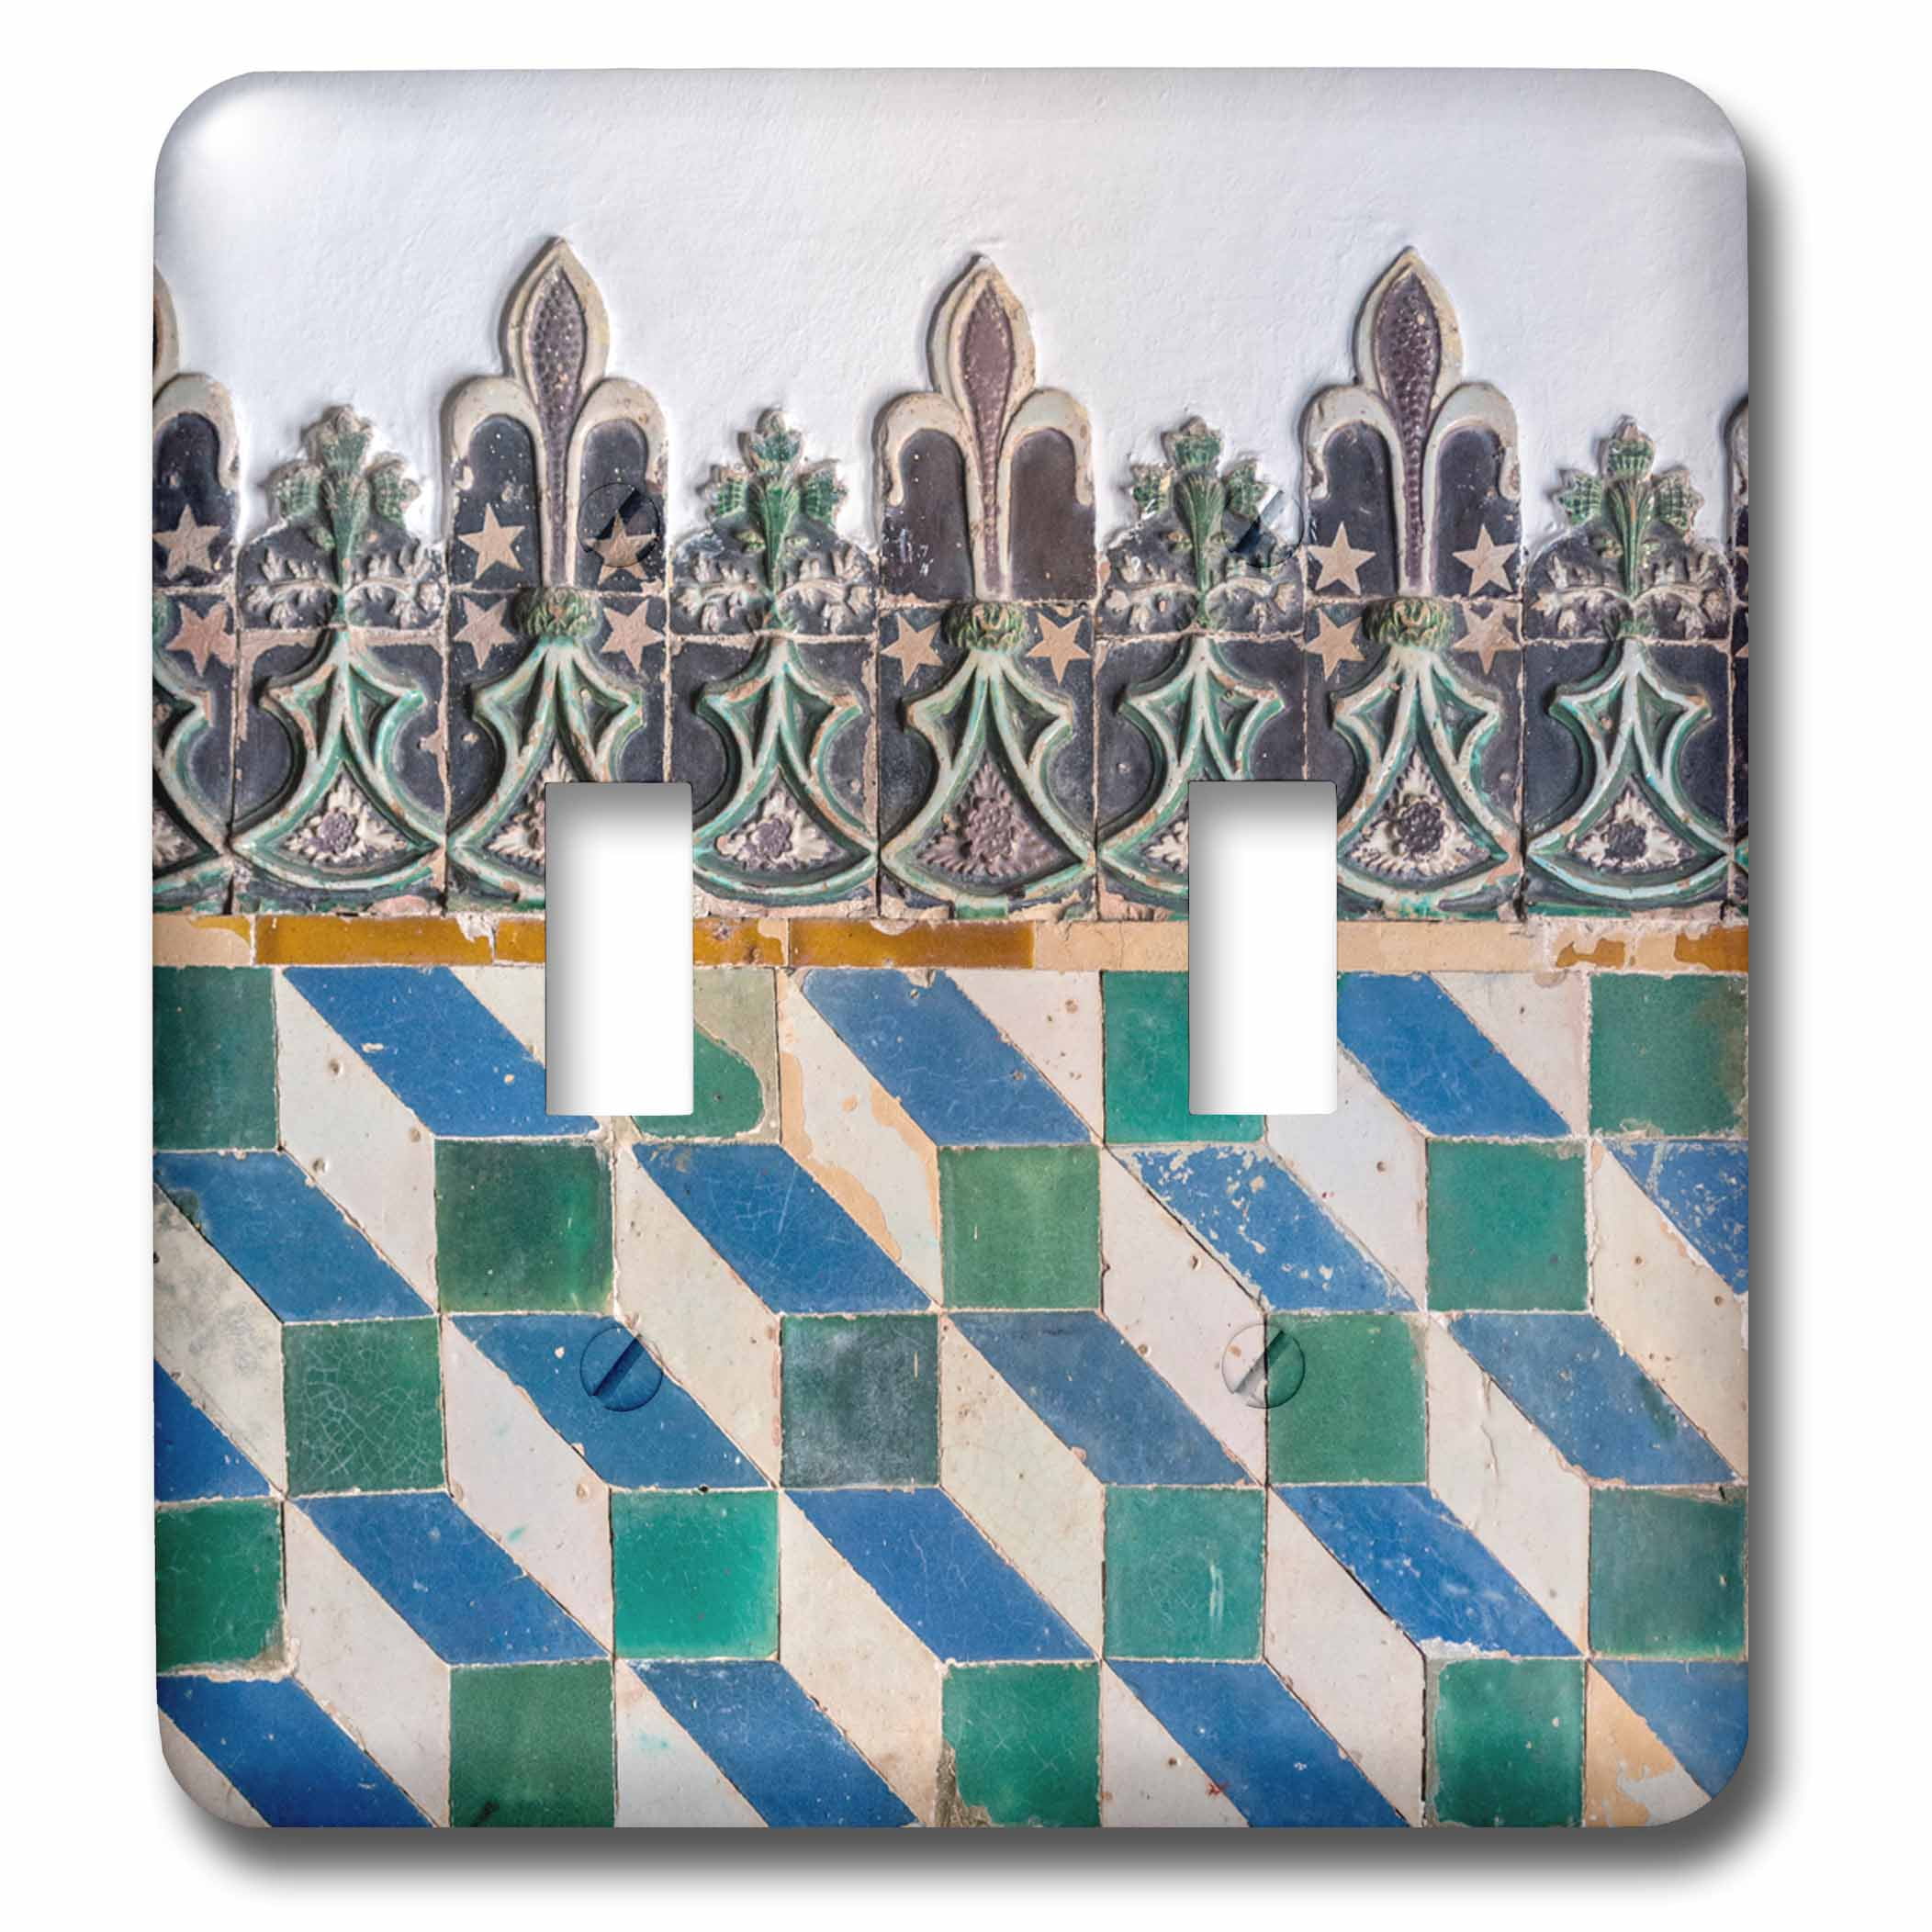 Geometric Ceramic Tile Double Toggle Switch Sintra National Palace 3D Rose LSP_227850_2 Portugal